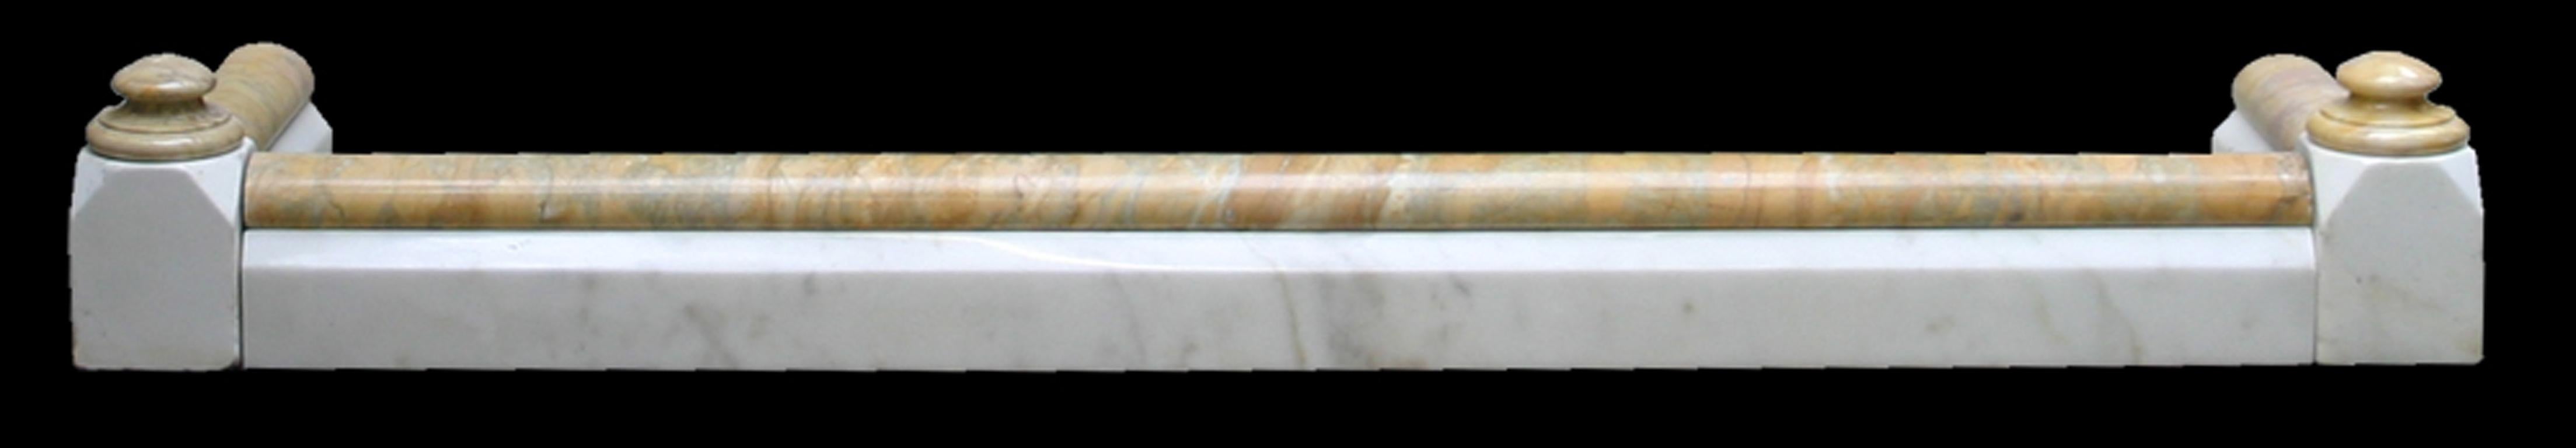 Antique marble fireplace fender in statuary white and sienna marble.
External sizes 1400mm x 350mm.